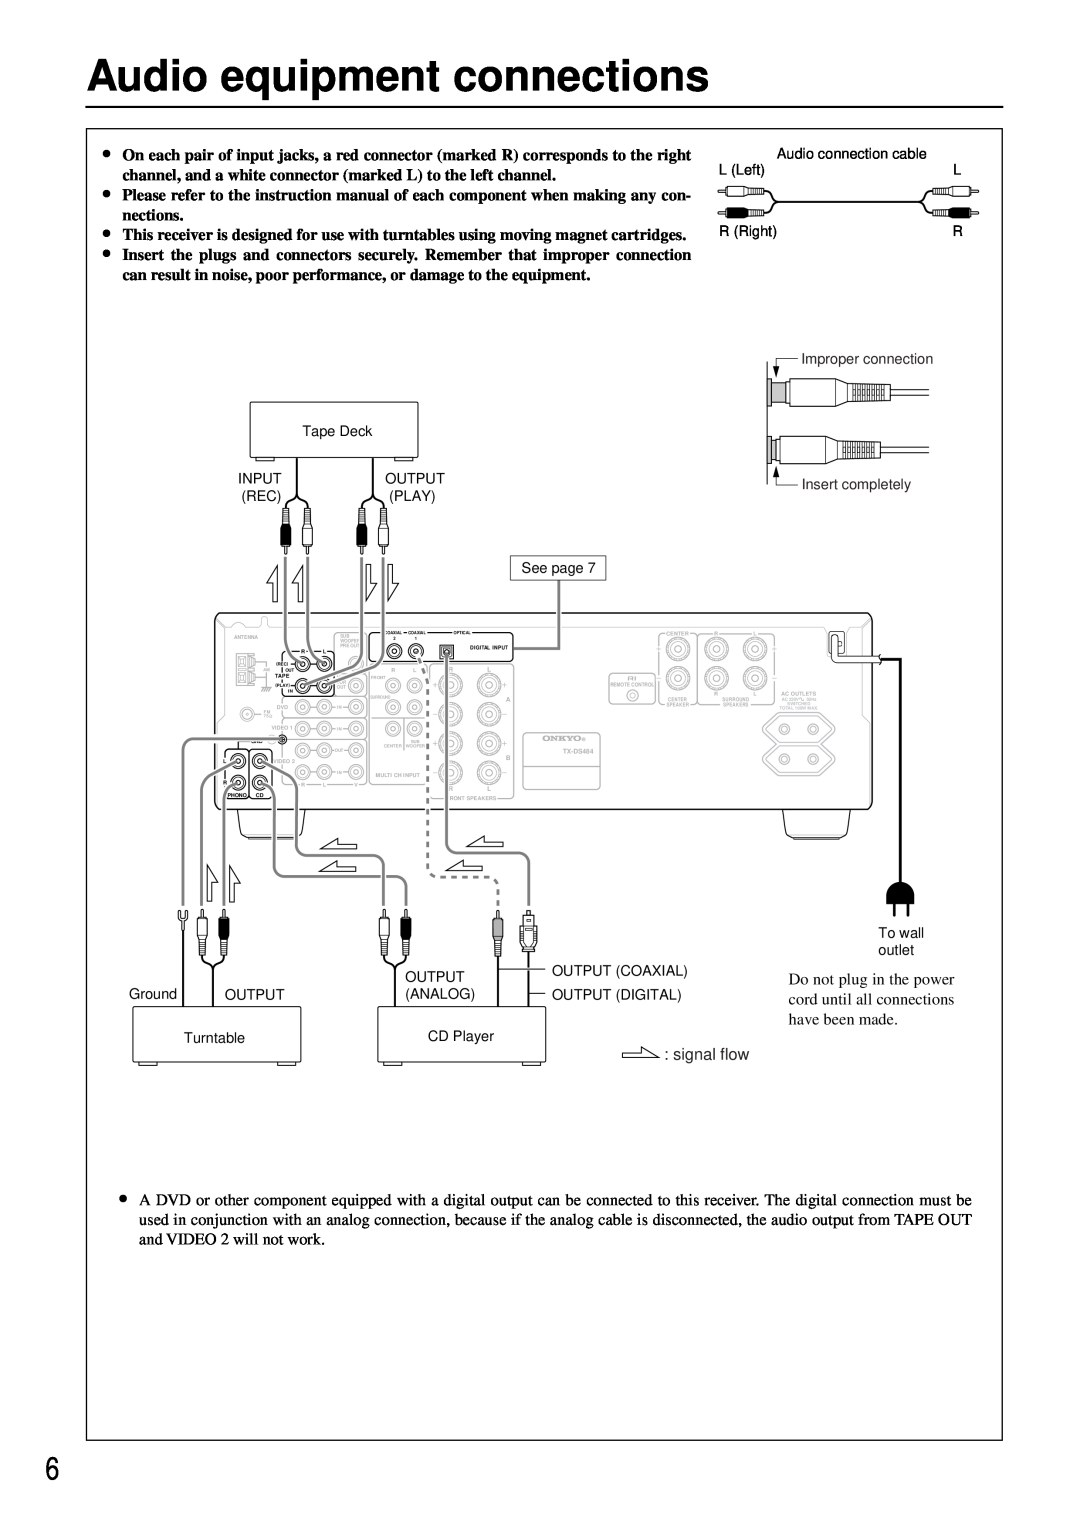 Onkyo TX-DS484 instruction manual Audio equipment connections, signal flow 